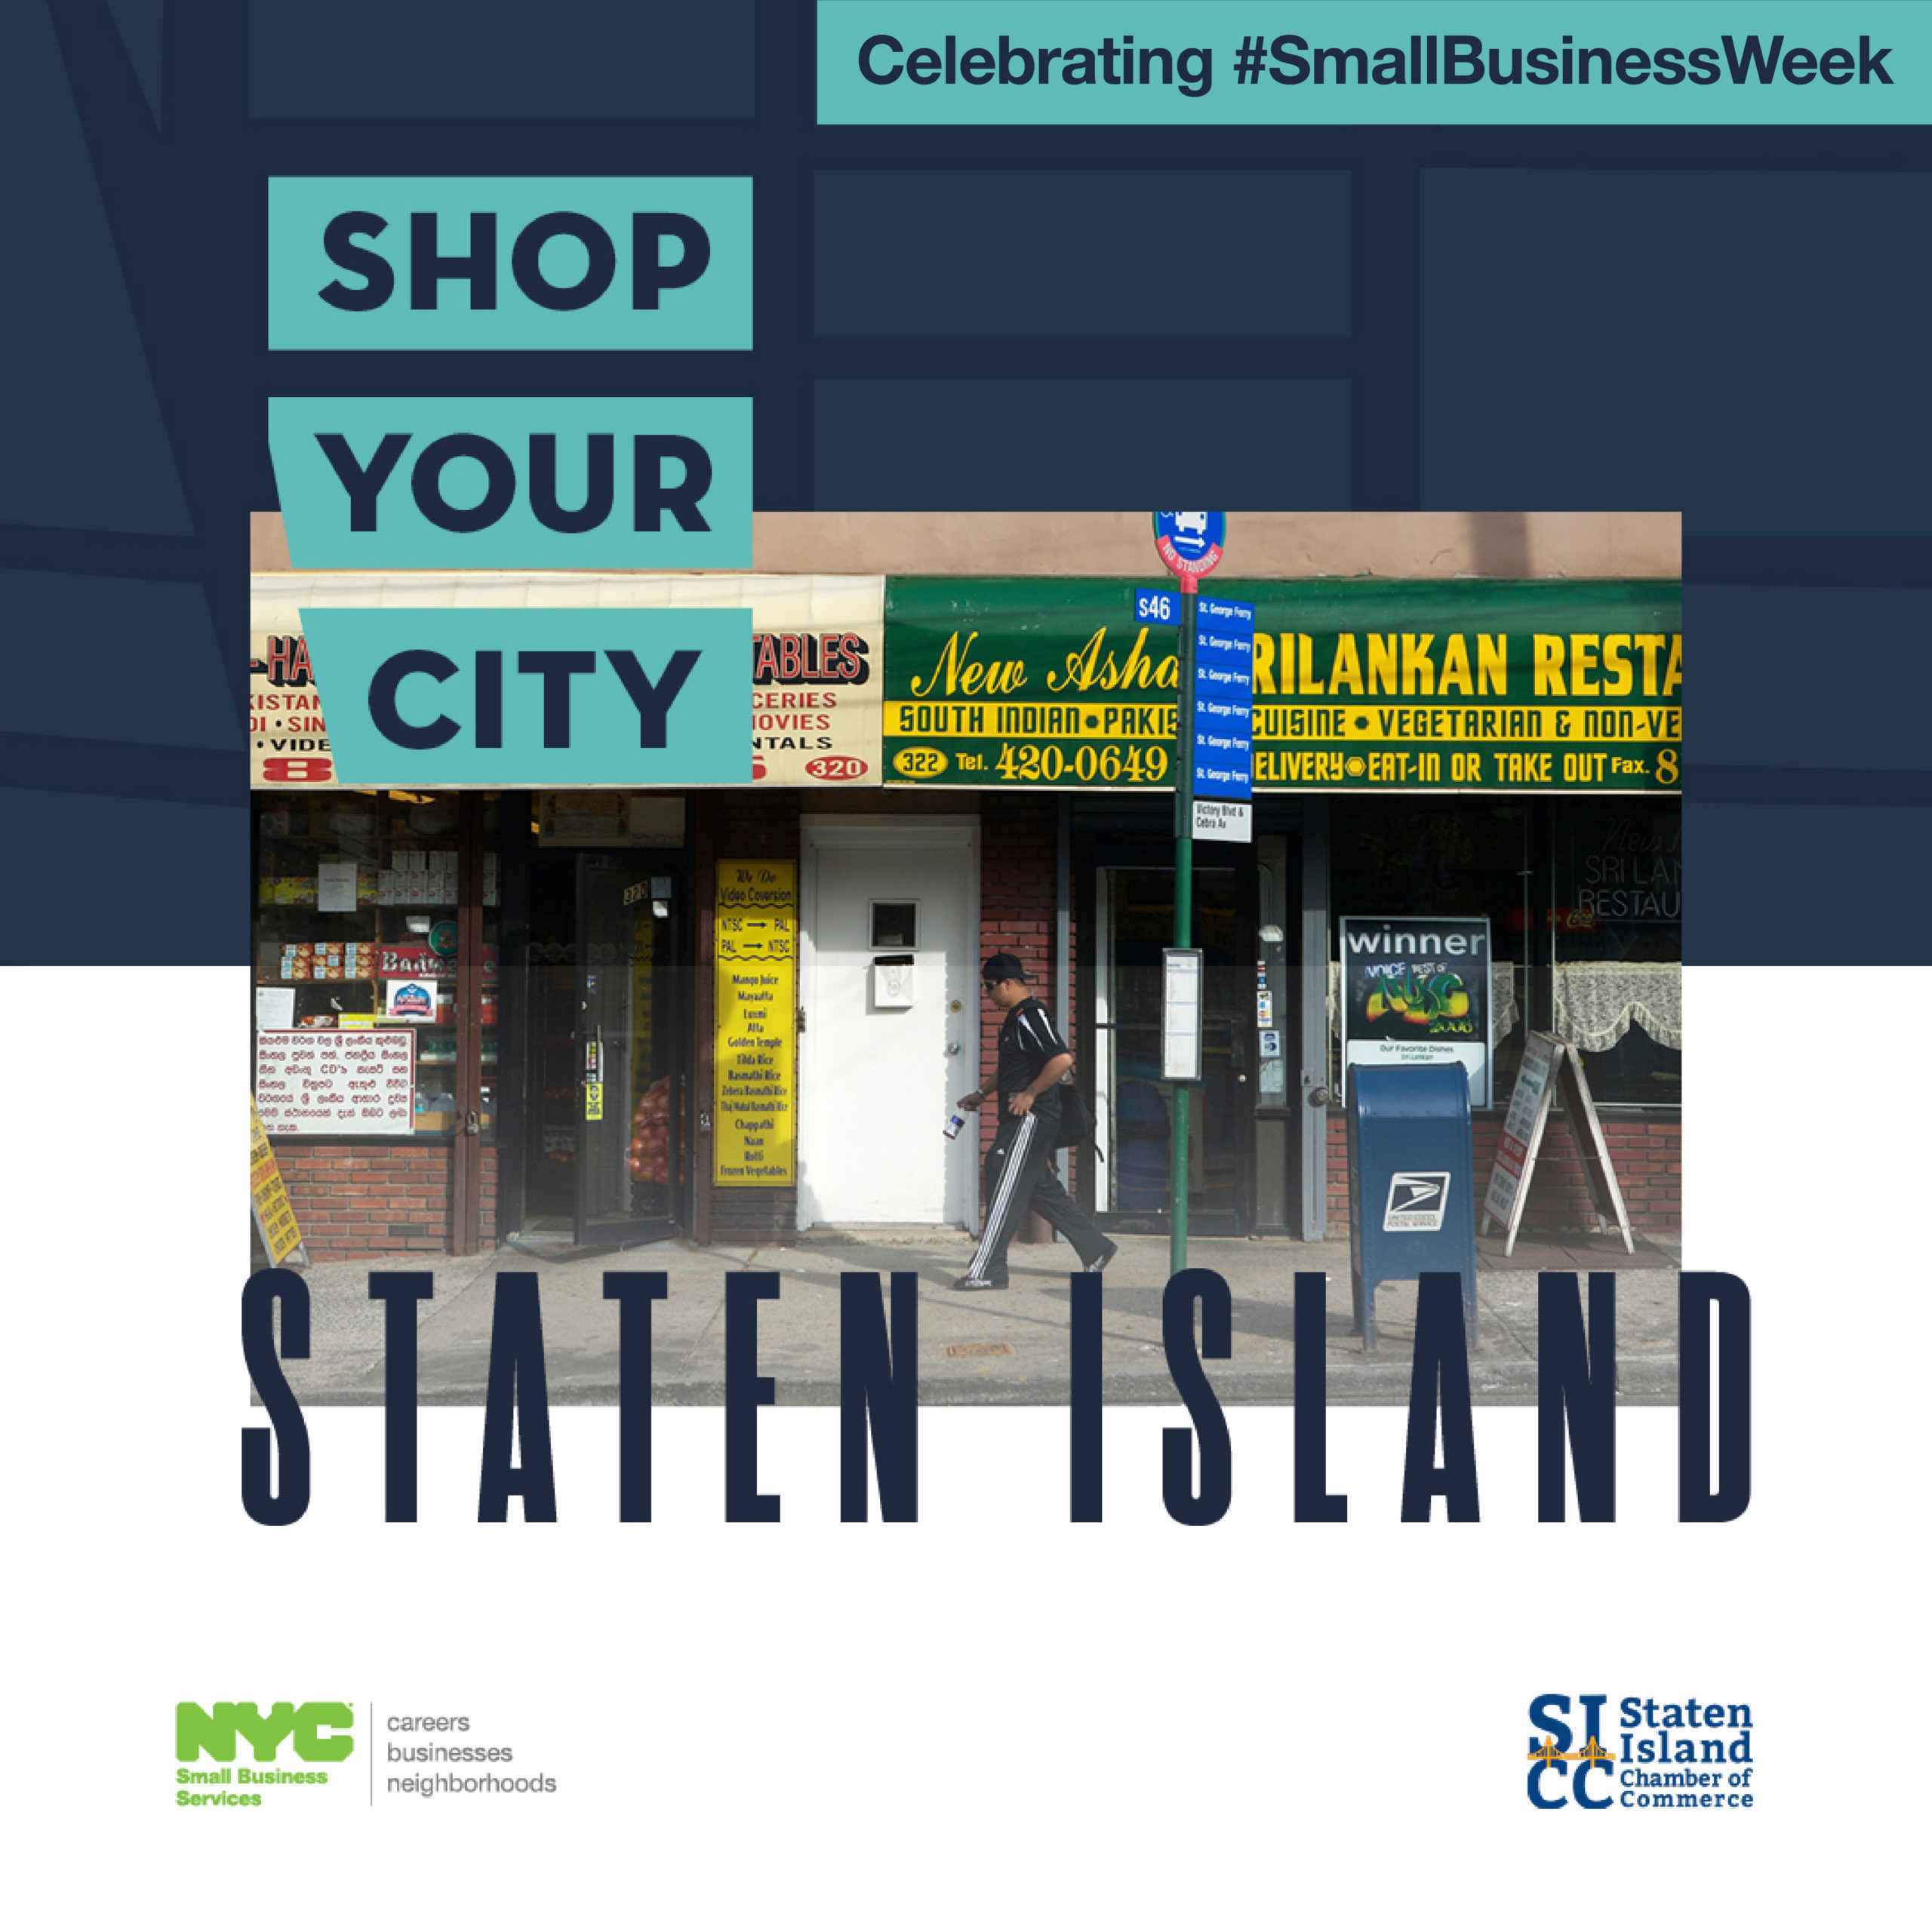 Commercial corridor on Victory Boulevard in Staten Island with Shop Your City Staten Island text and SBS and partner logos